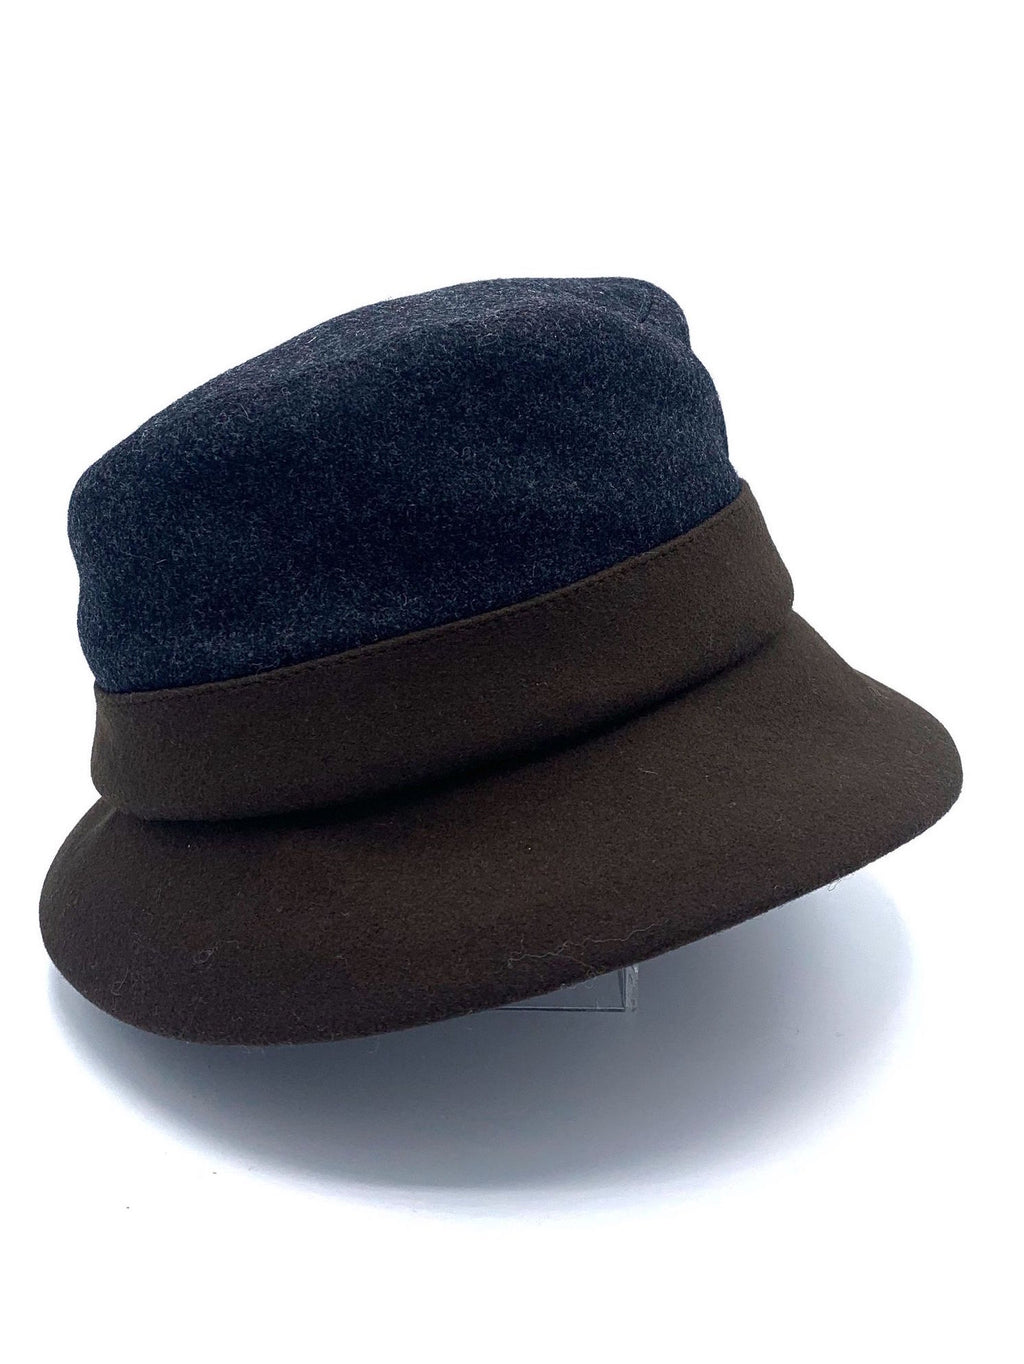 right side view of the lillie & cohoe midnight/brown wool classic alexa hat. This hat is midnight blue on the top and dark brown on the bottom. The hat has a flat brim.